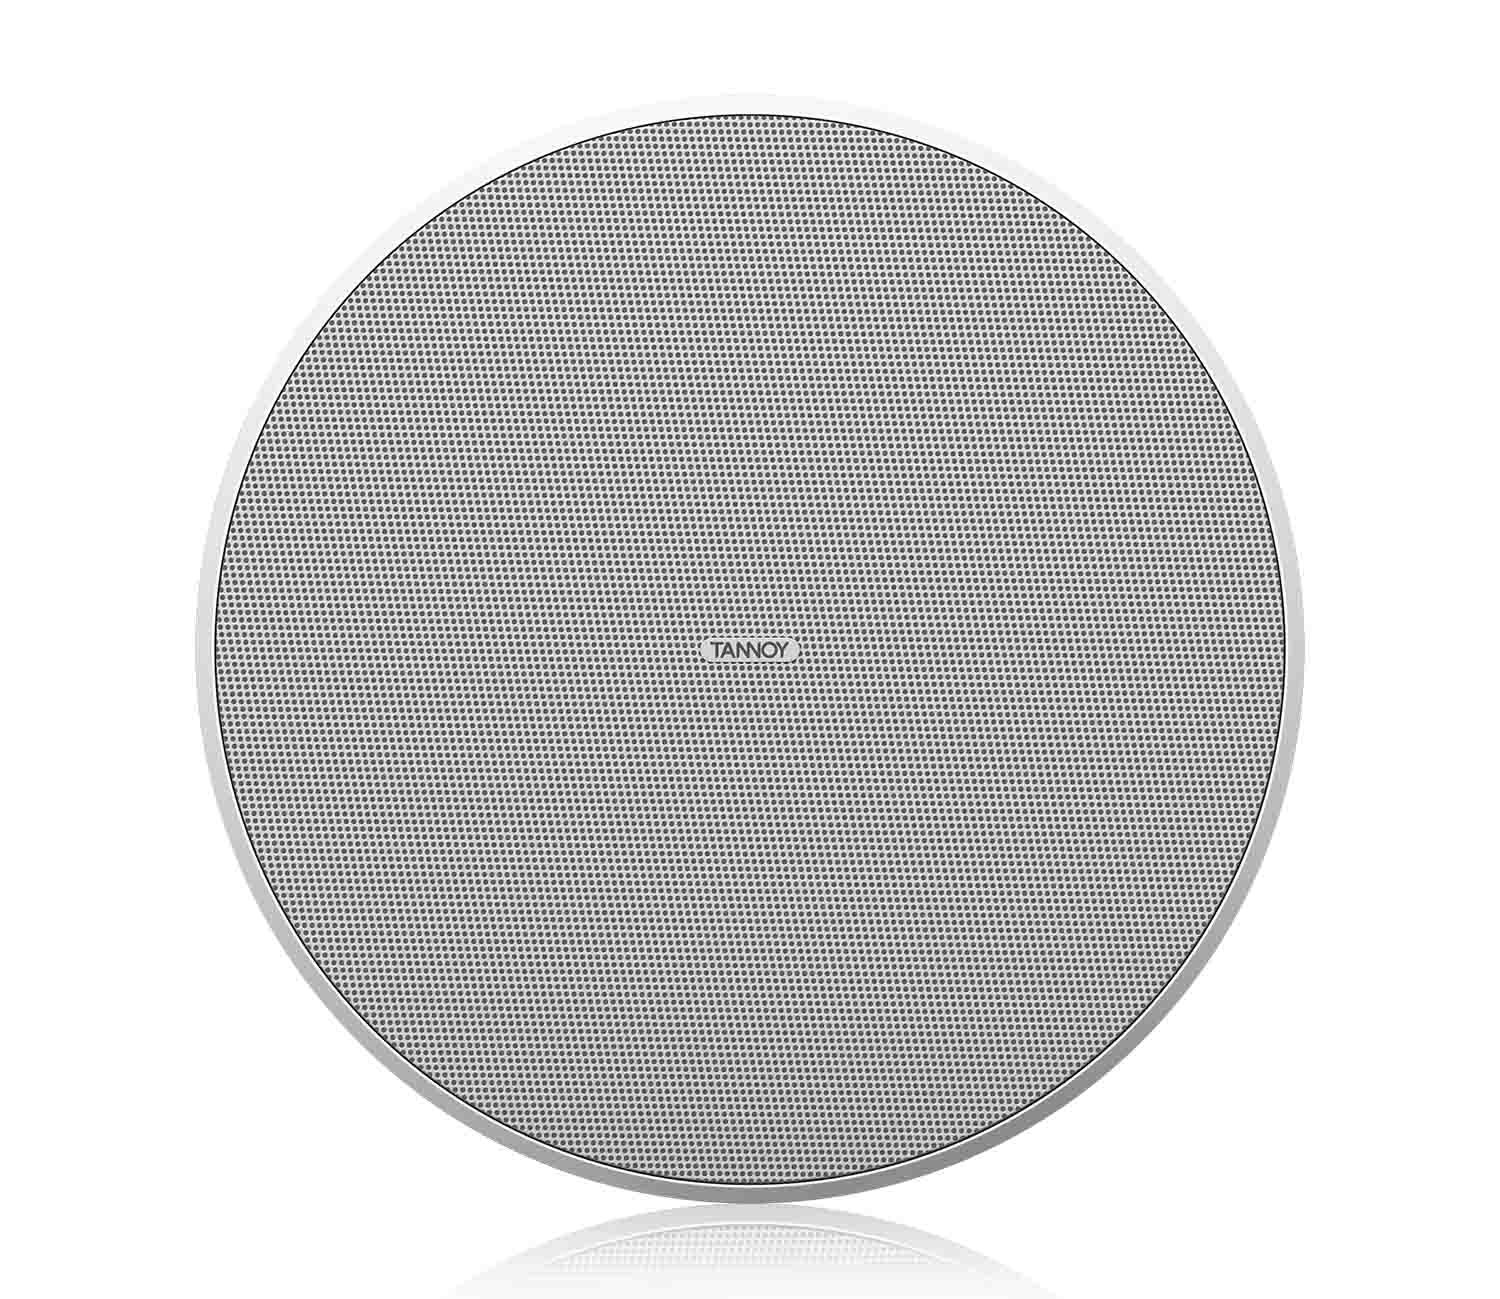 Tannoy ARCO GRILLE CMS 503-WH ARCO Grille Accessory for CMS 503 Series Ceiling Loudspeakers - White - Hollywood DJ